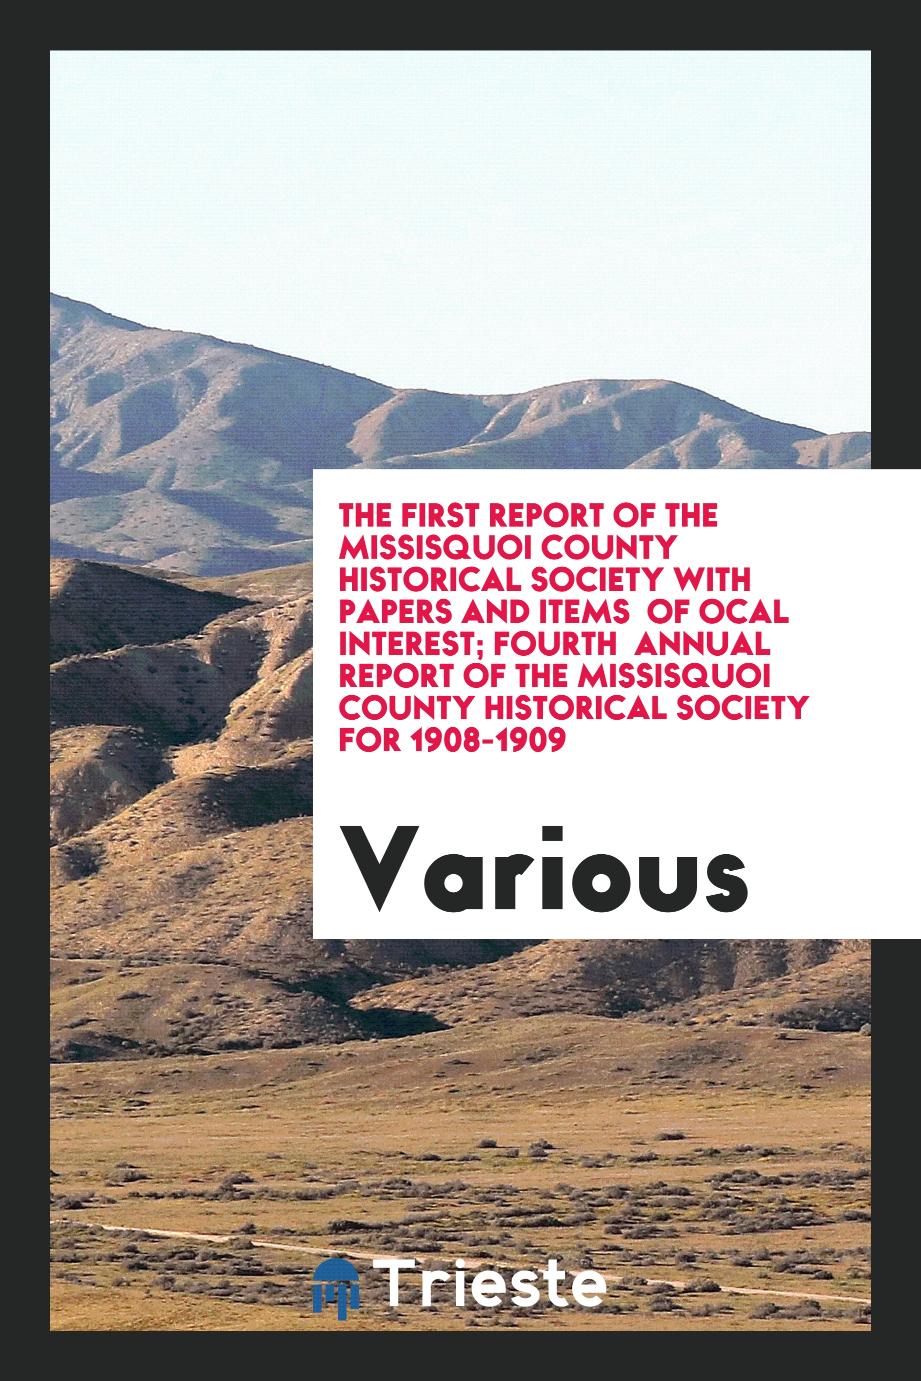 The first report of the Missisquoi County Historical Society with papers and items of ocal interest; Fourth annual report of the Missisquoi County Historical Society for 1908-1909